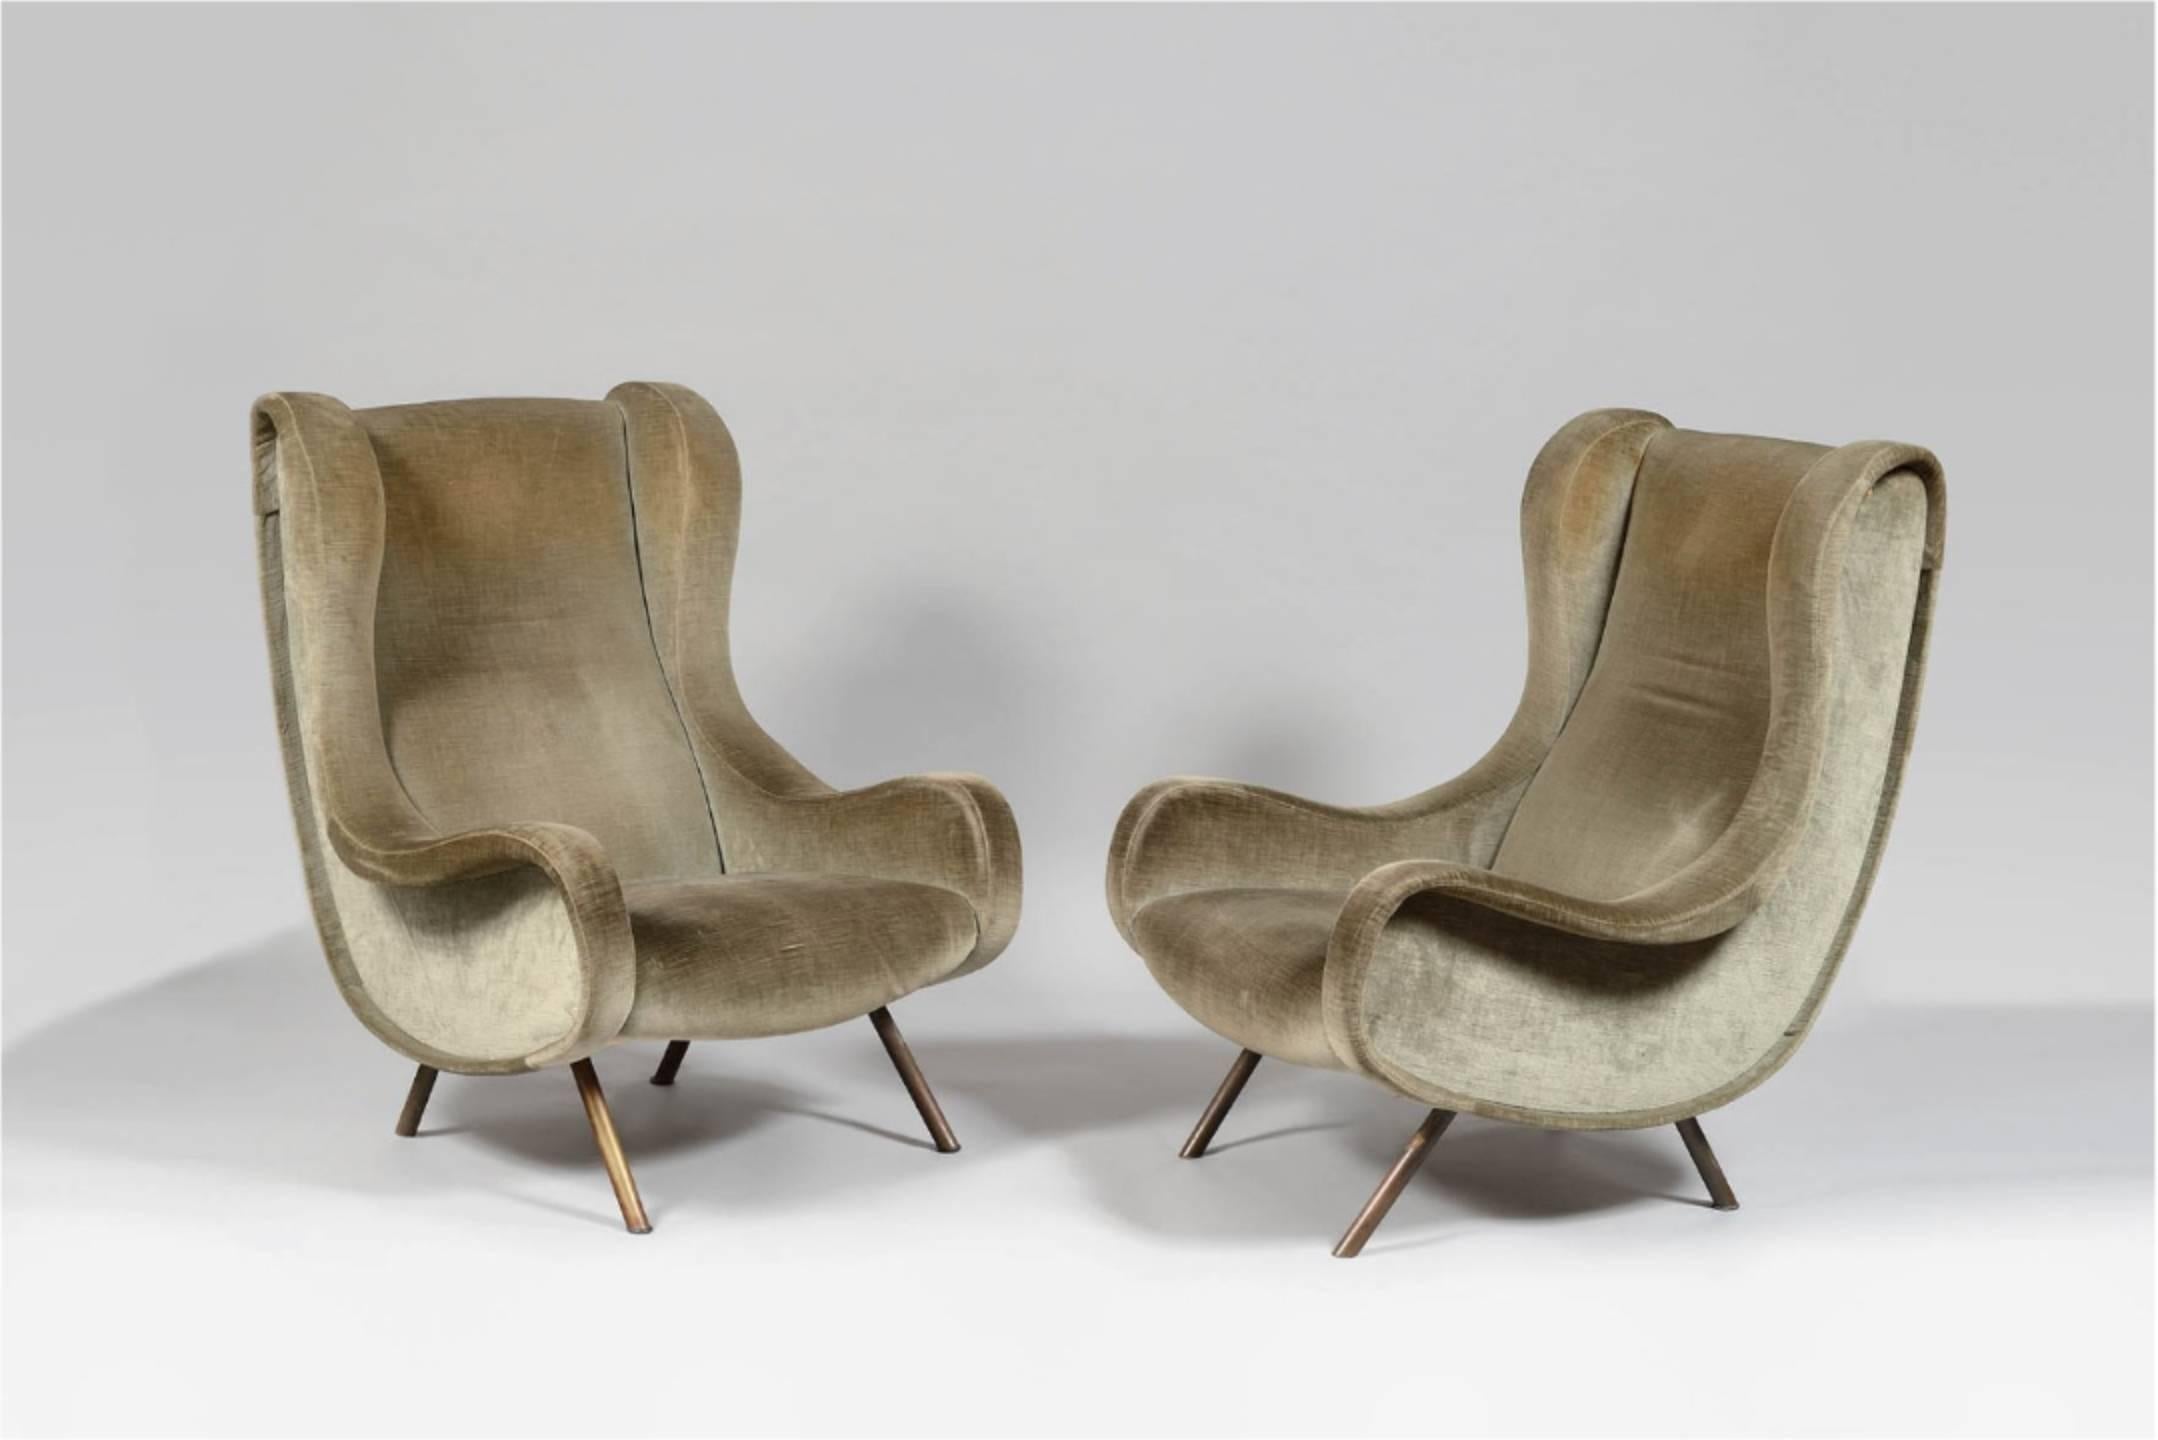 A pair of original Marco Zanuso Senior chairs, Arflex, France/Italy, 1960s. The fabric is a bit dirty so the price here includes reupholstery in customer supplied material.  Ships worldwide - please contact us for options.